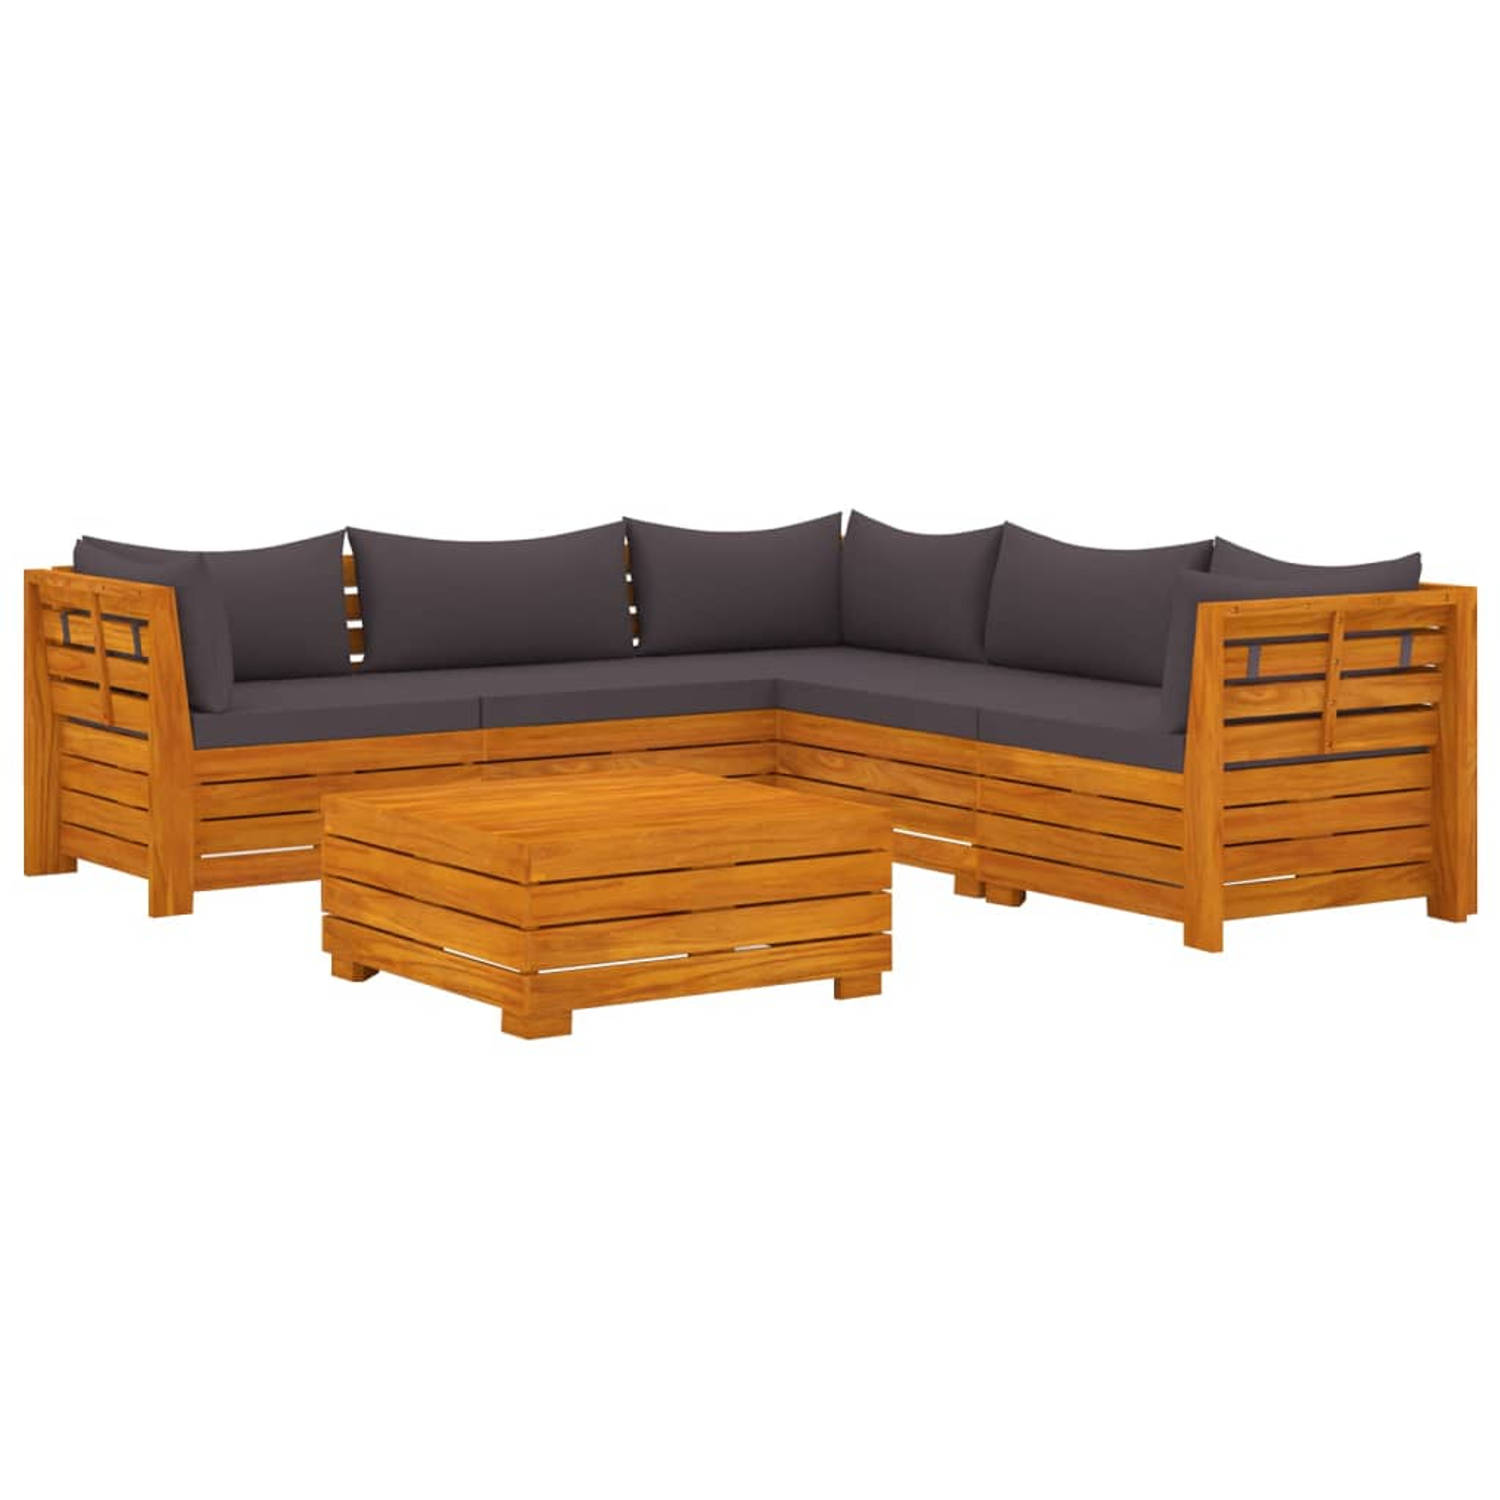 The Living Store Loungeset - Acaciahout - Donkergrijs - 68x68x60 cm - Inclusief kussens